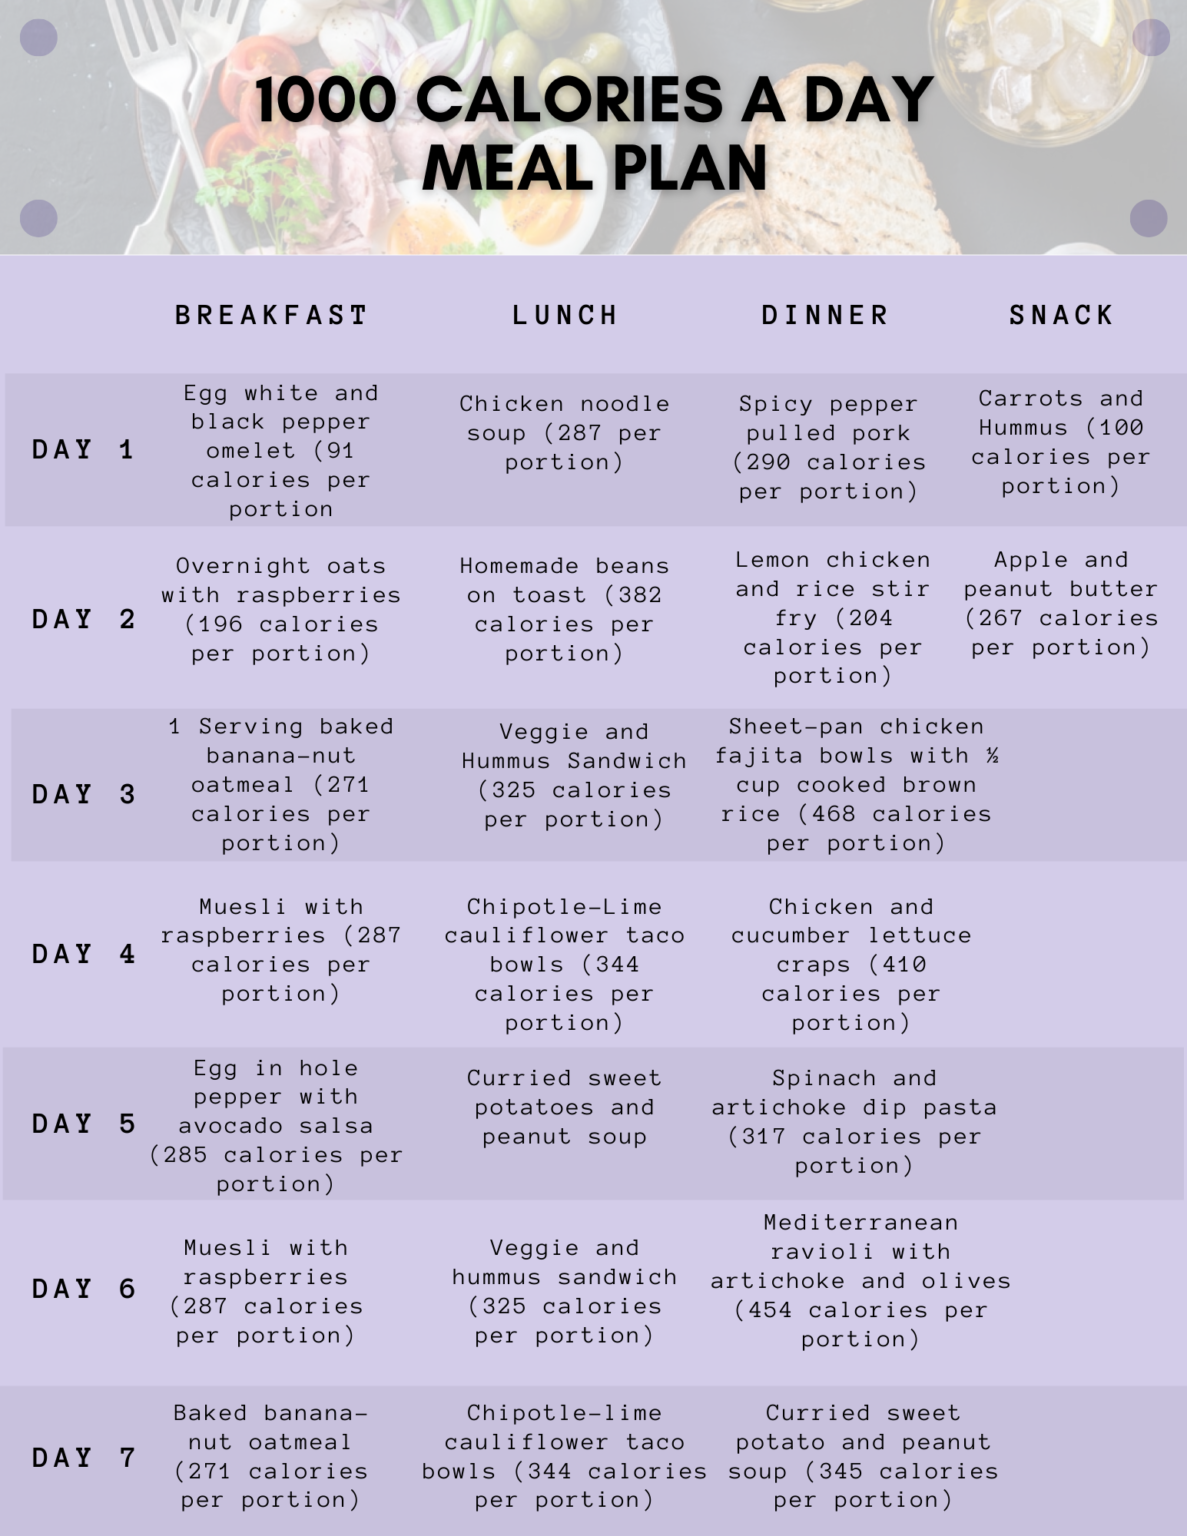 1000 Calories a Day Meal Plan